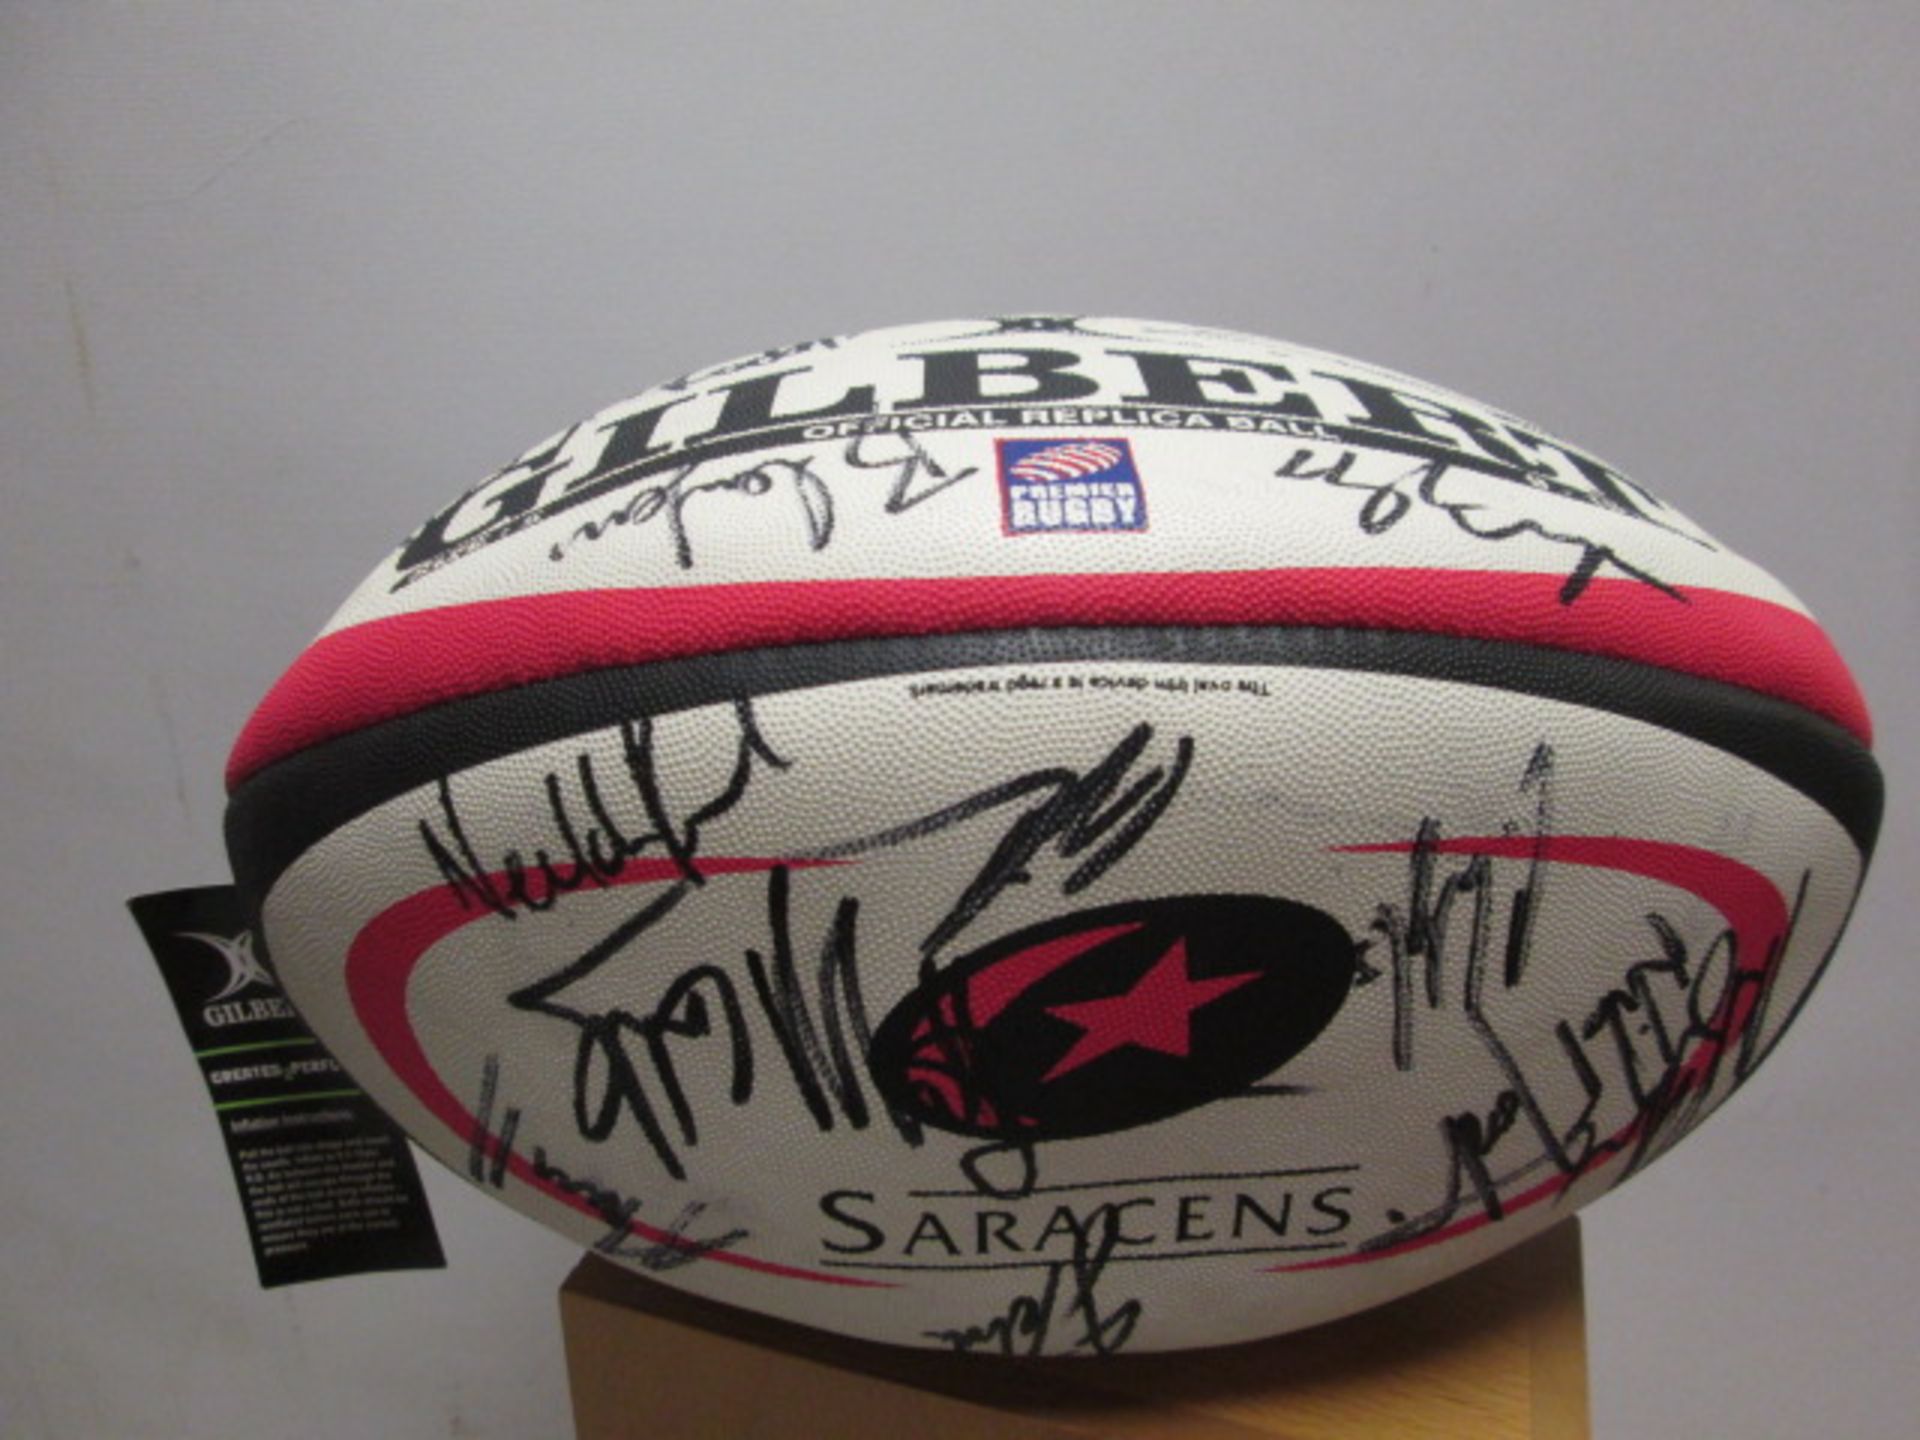 Saracens Kooga Rugby Union Shirt & Gilbert Official Replica Rugby Ball (Size 5). Both Items Signed - Image 6 of 8